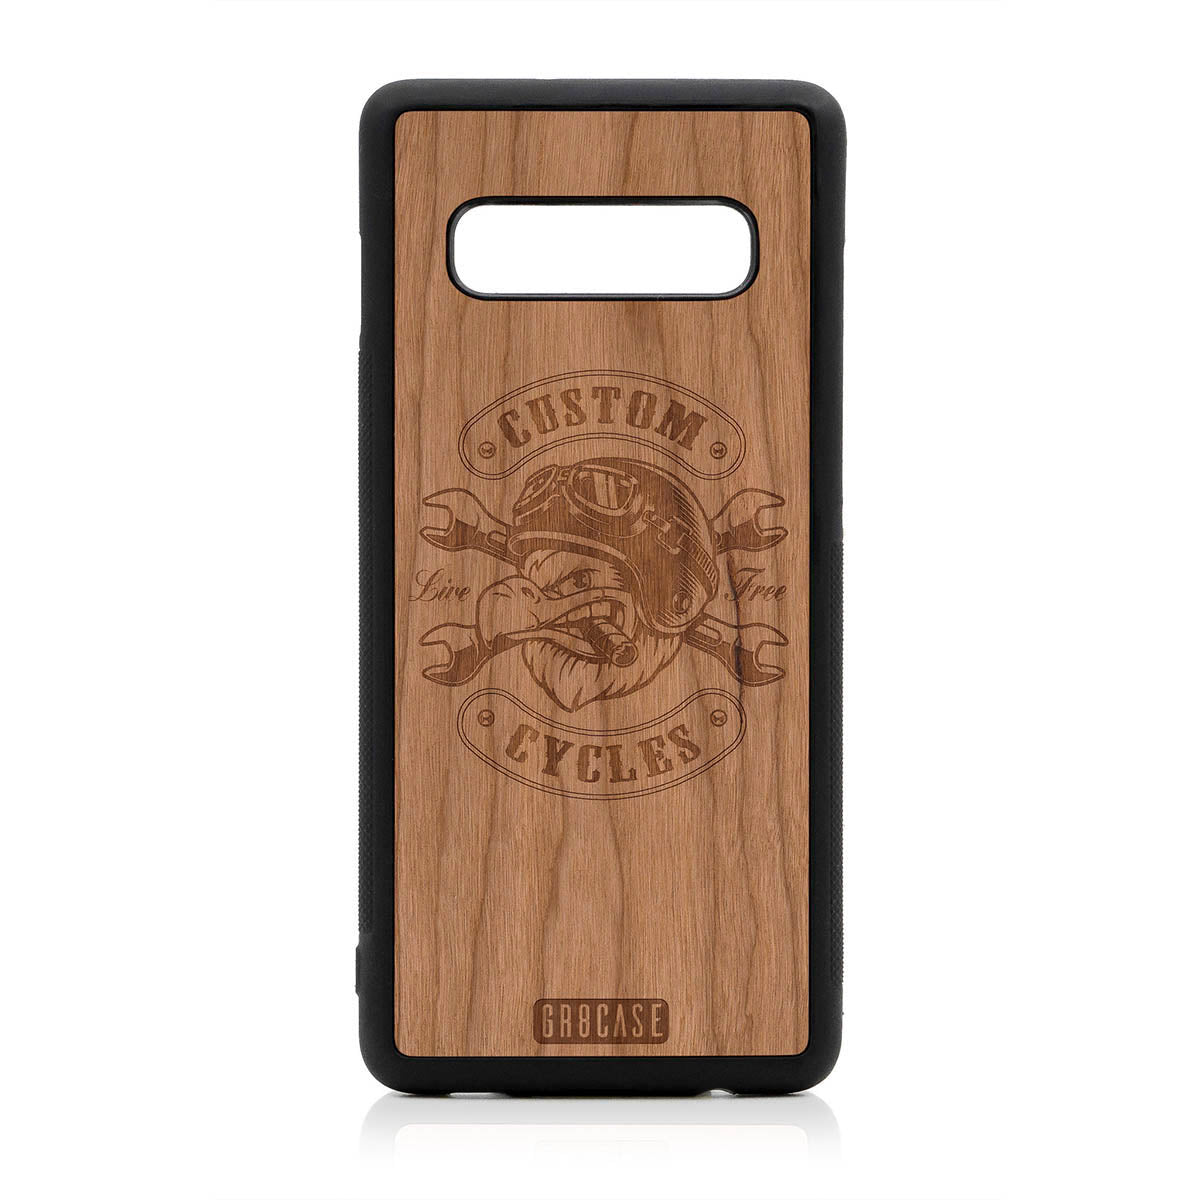 Custom Cycles Live Free (Biker Eagle) Design Wood Case For Samsung Galaxy S10 Plus by GR8CASE